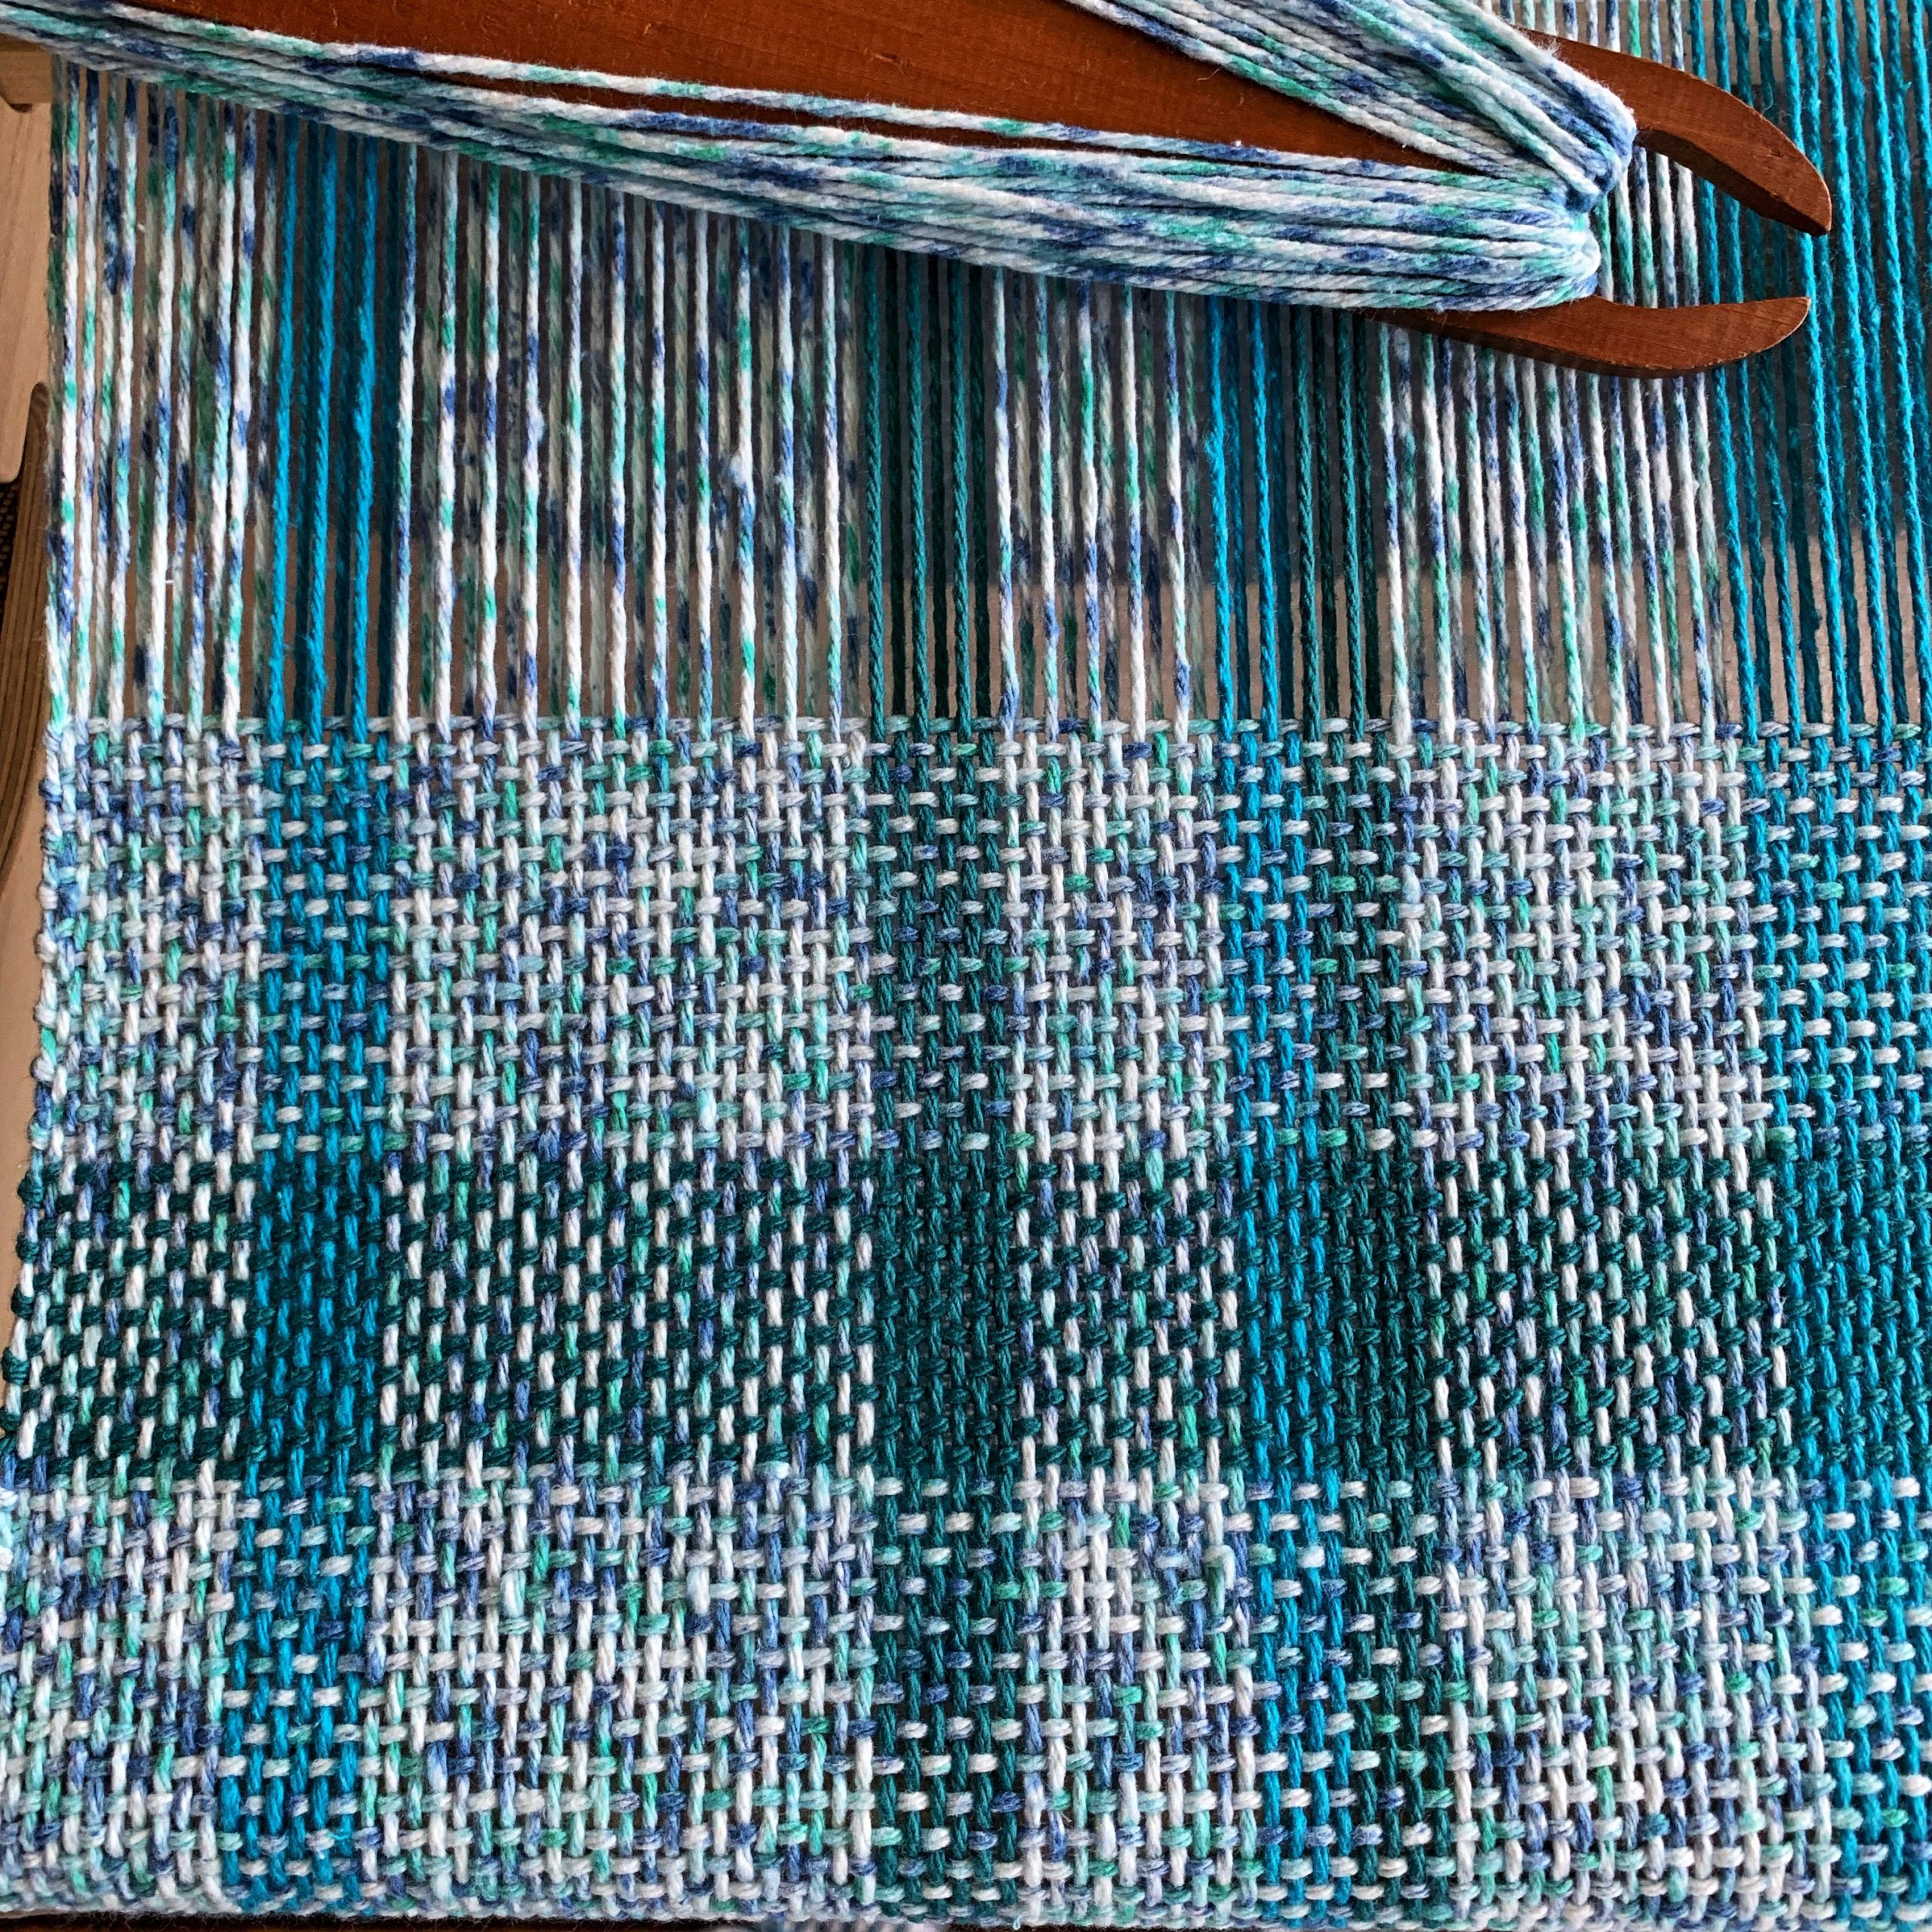 How to Create Loops, Get Started in Weaving